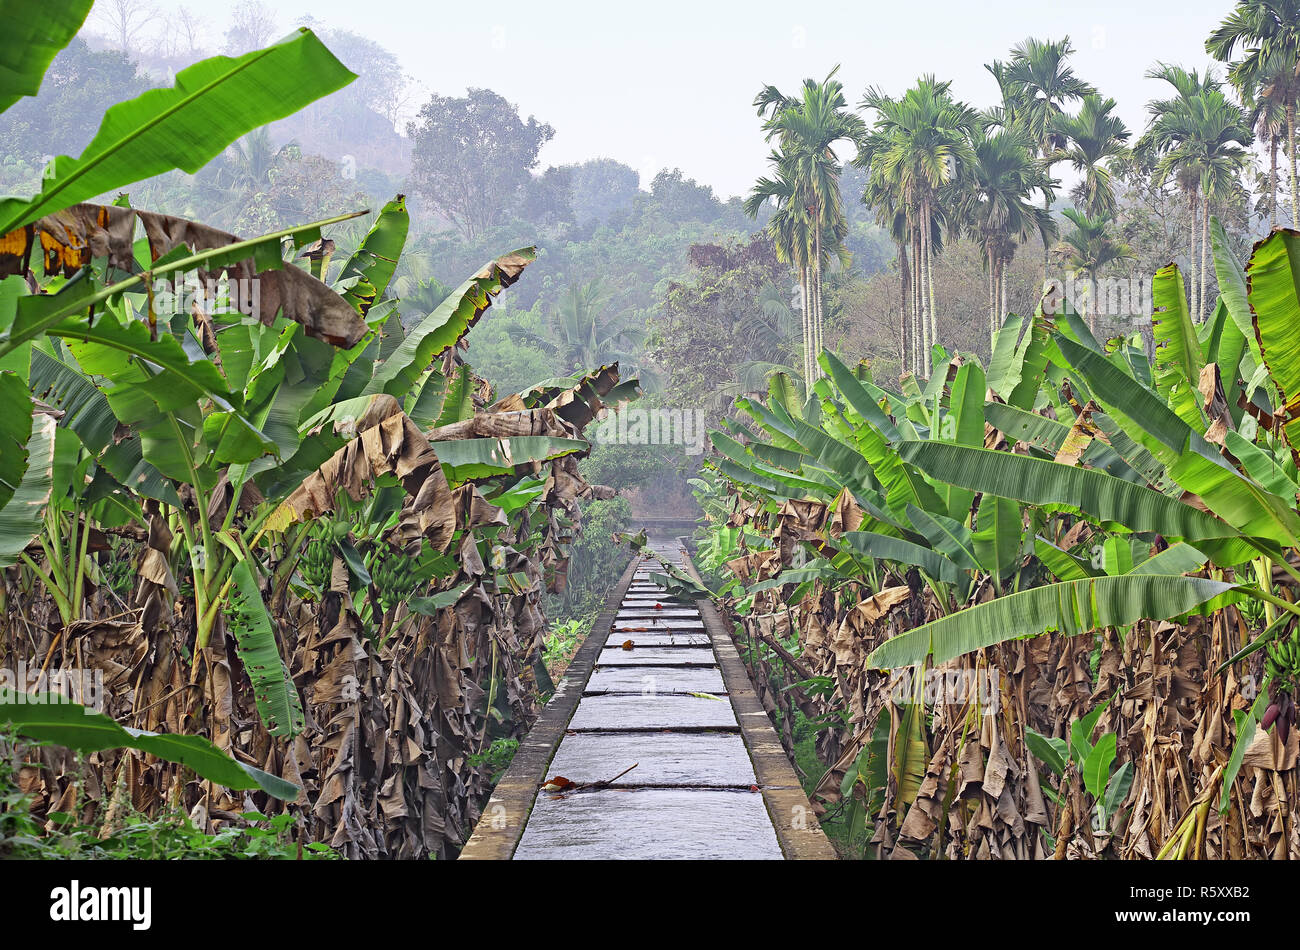 Tranquil scene of irrigation canal made of concrete with full of water passing through banana plantation in a farm in Kerala, India. Stock Photo